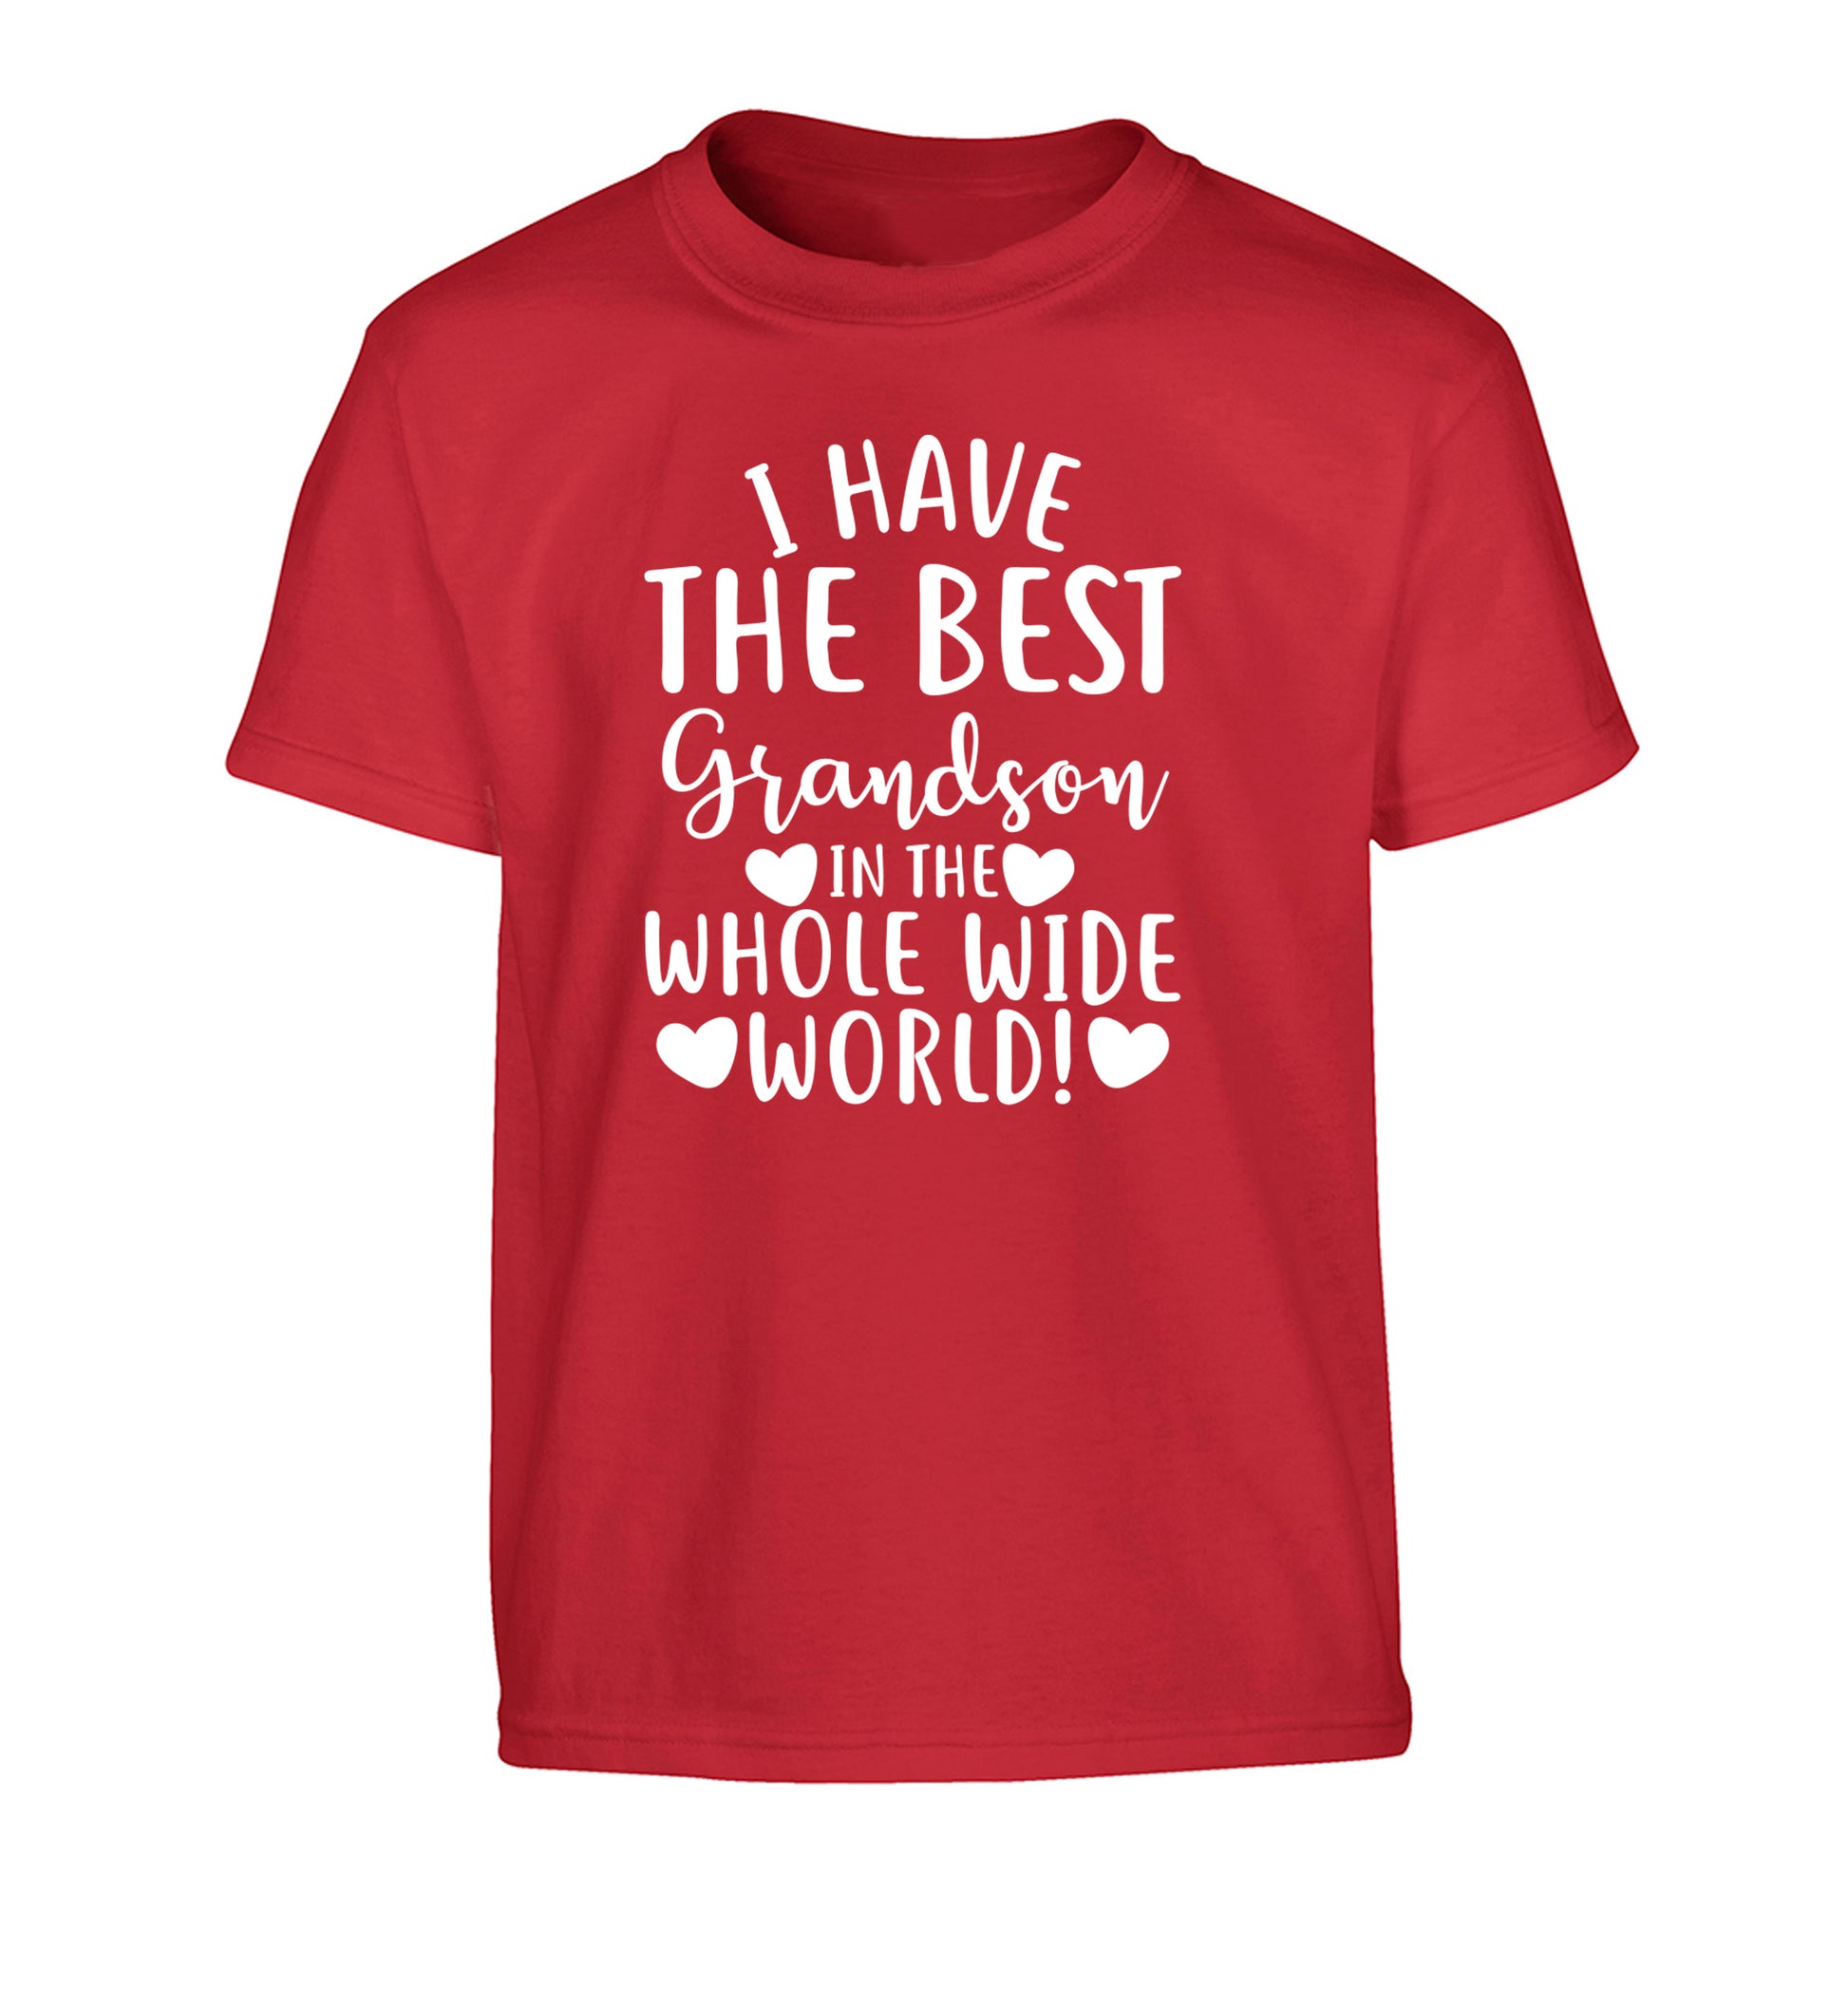 I have the best grandson in the whole wide world! Children's red Tshirt 12-13 Years